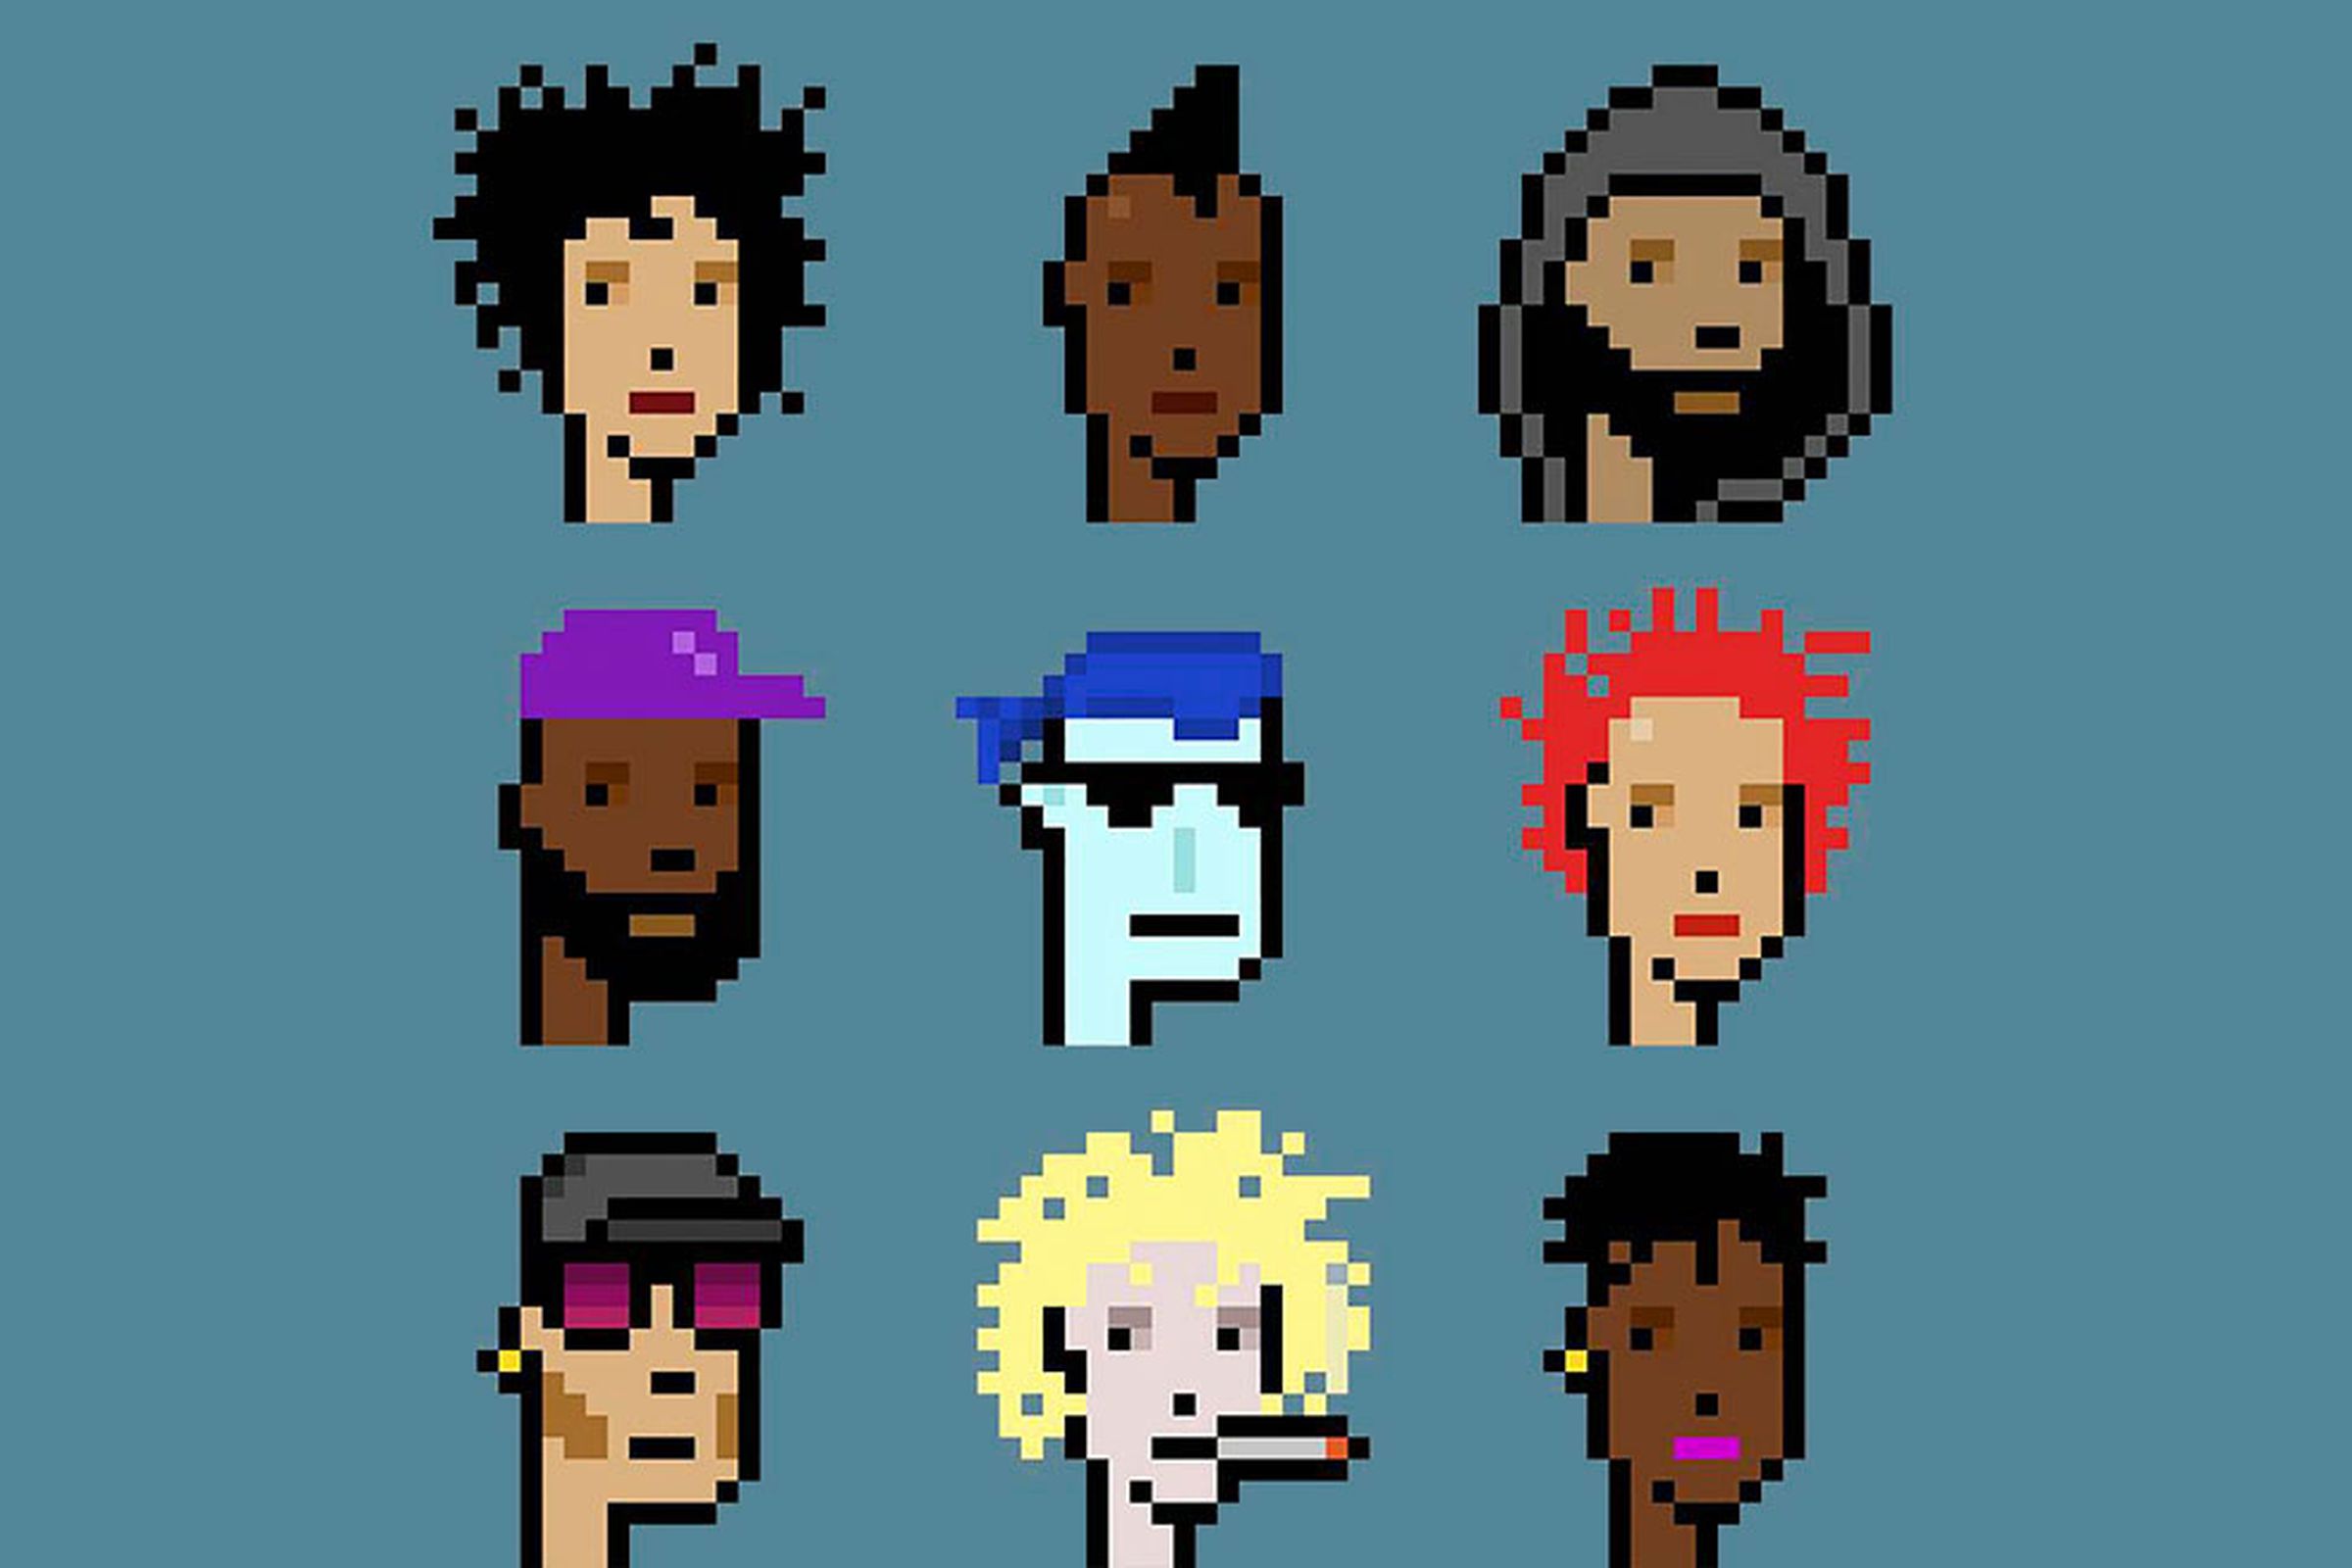 The collection features nine portraits, including one alien.